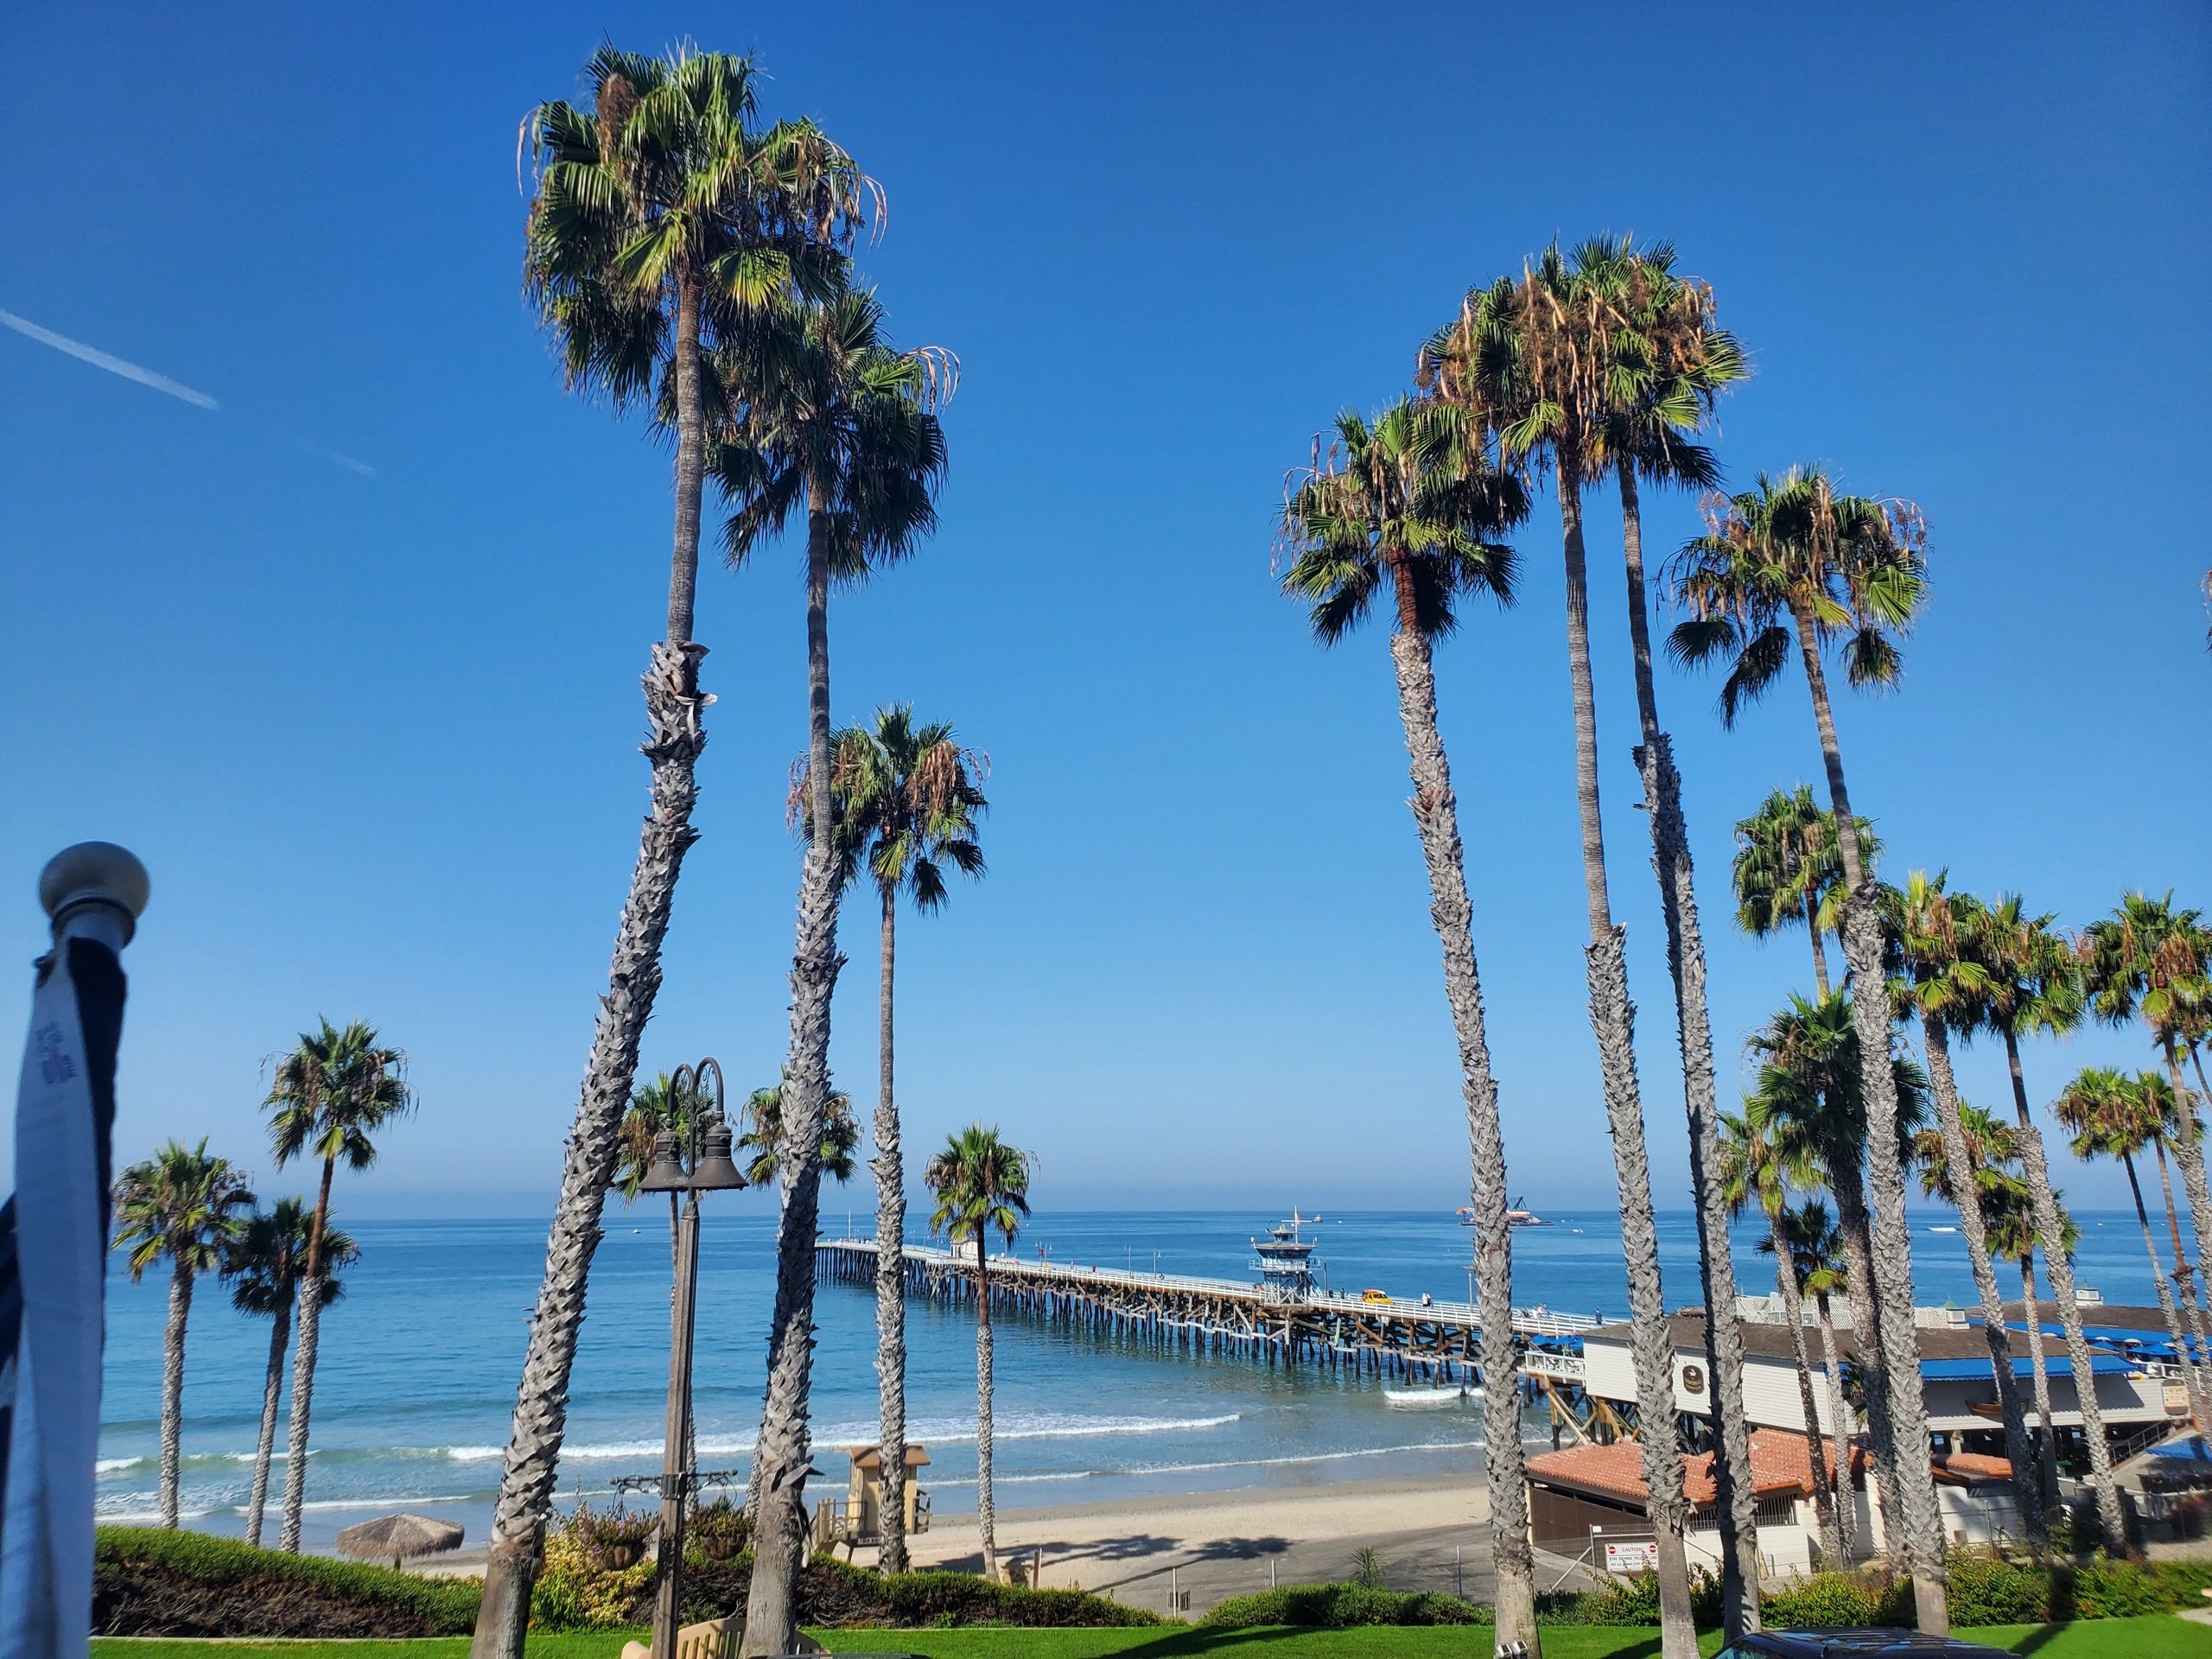 A beach with palm trees and pier in the background.